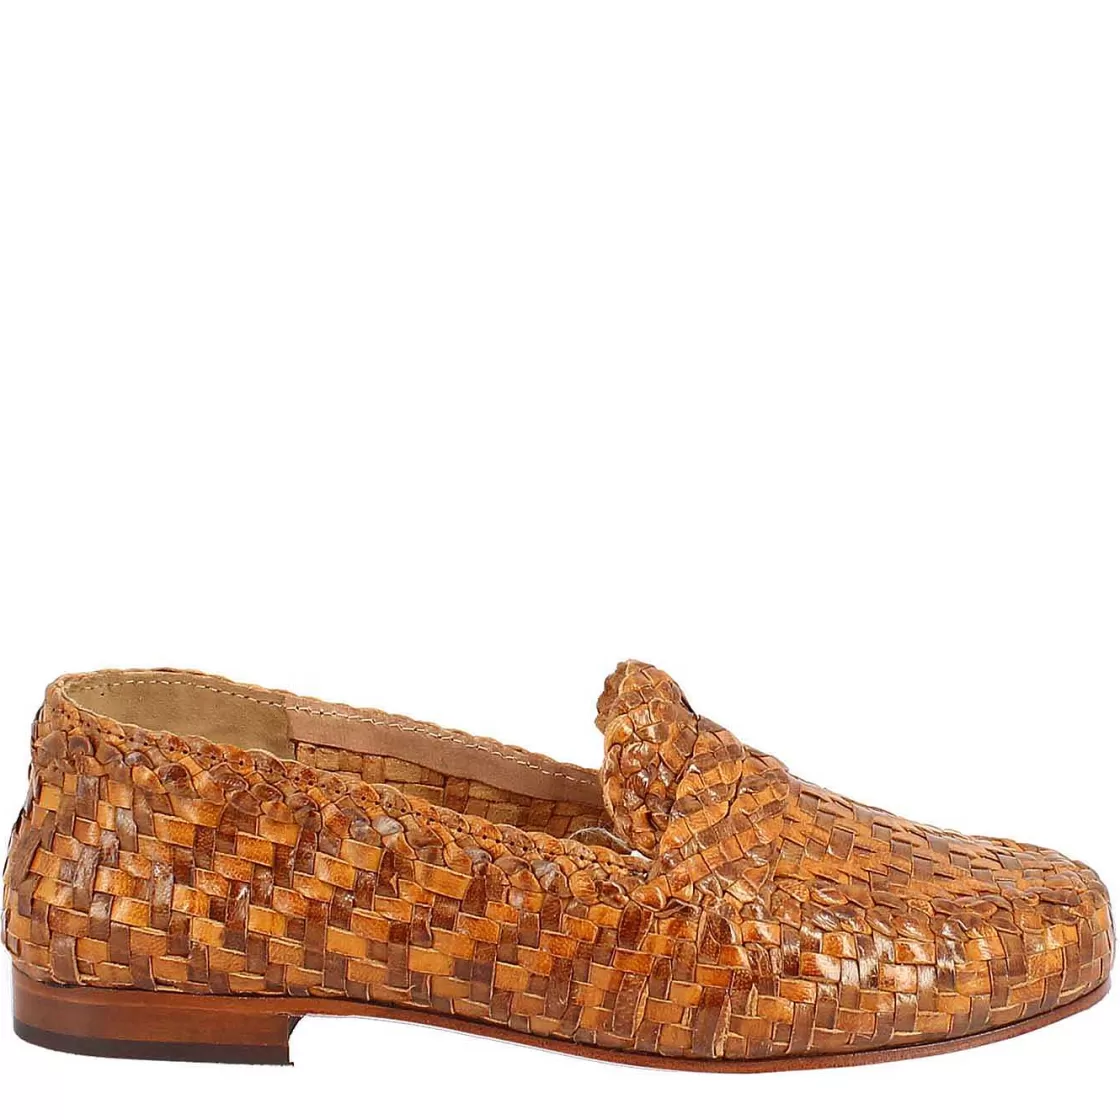 Leonardo Women'S Loafers In Brown And Honey Woven Leather Fashion